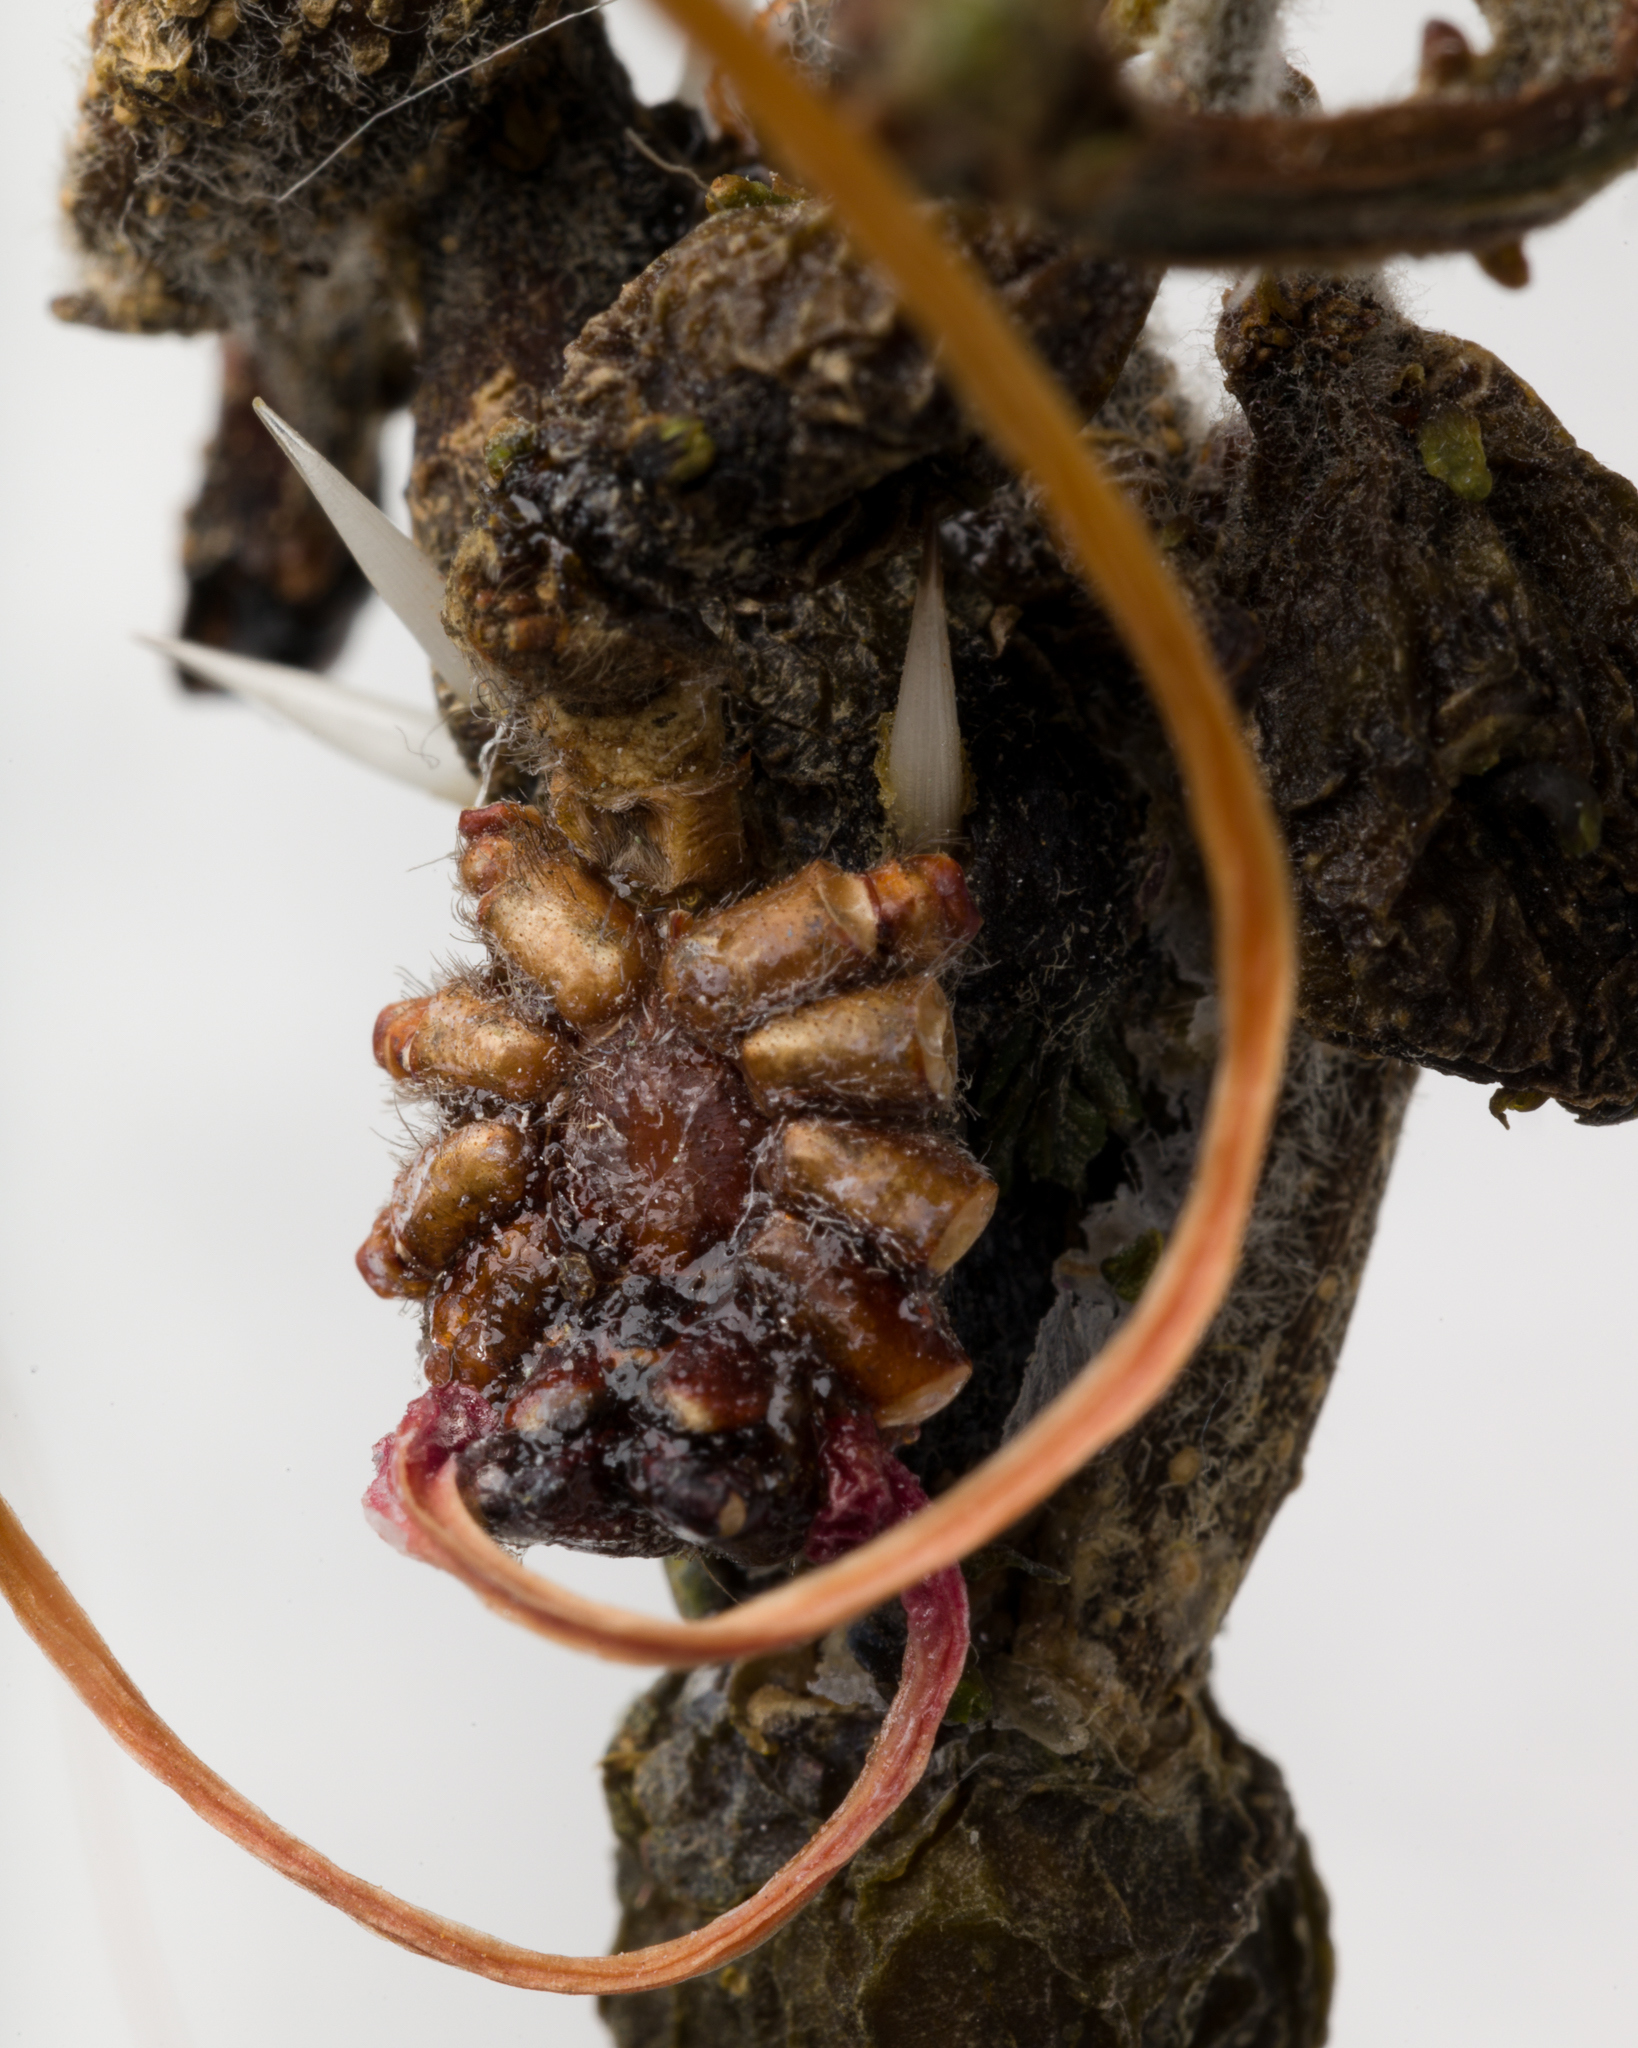 Laura Hjort Jensen, "Lonesome Town Potato", hedgehog spikes, human hair, copper wire, spider corpse, thistle fluff, protea leaves, 2023